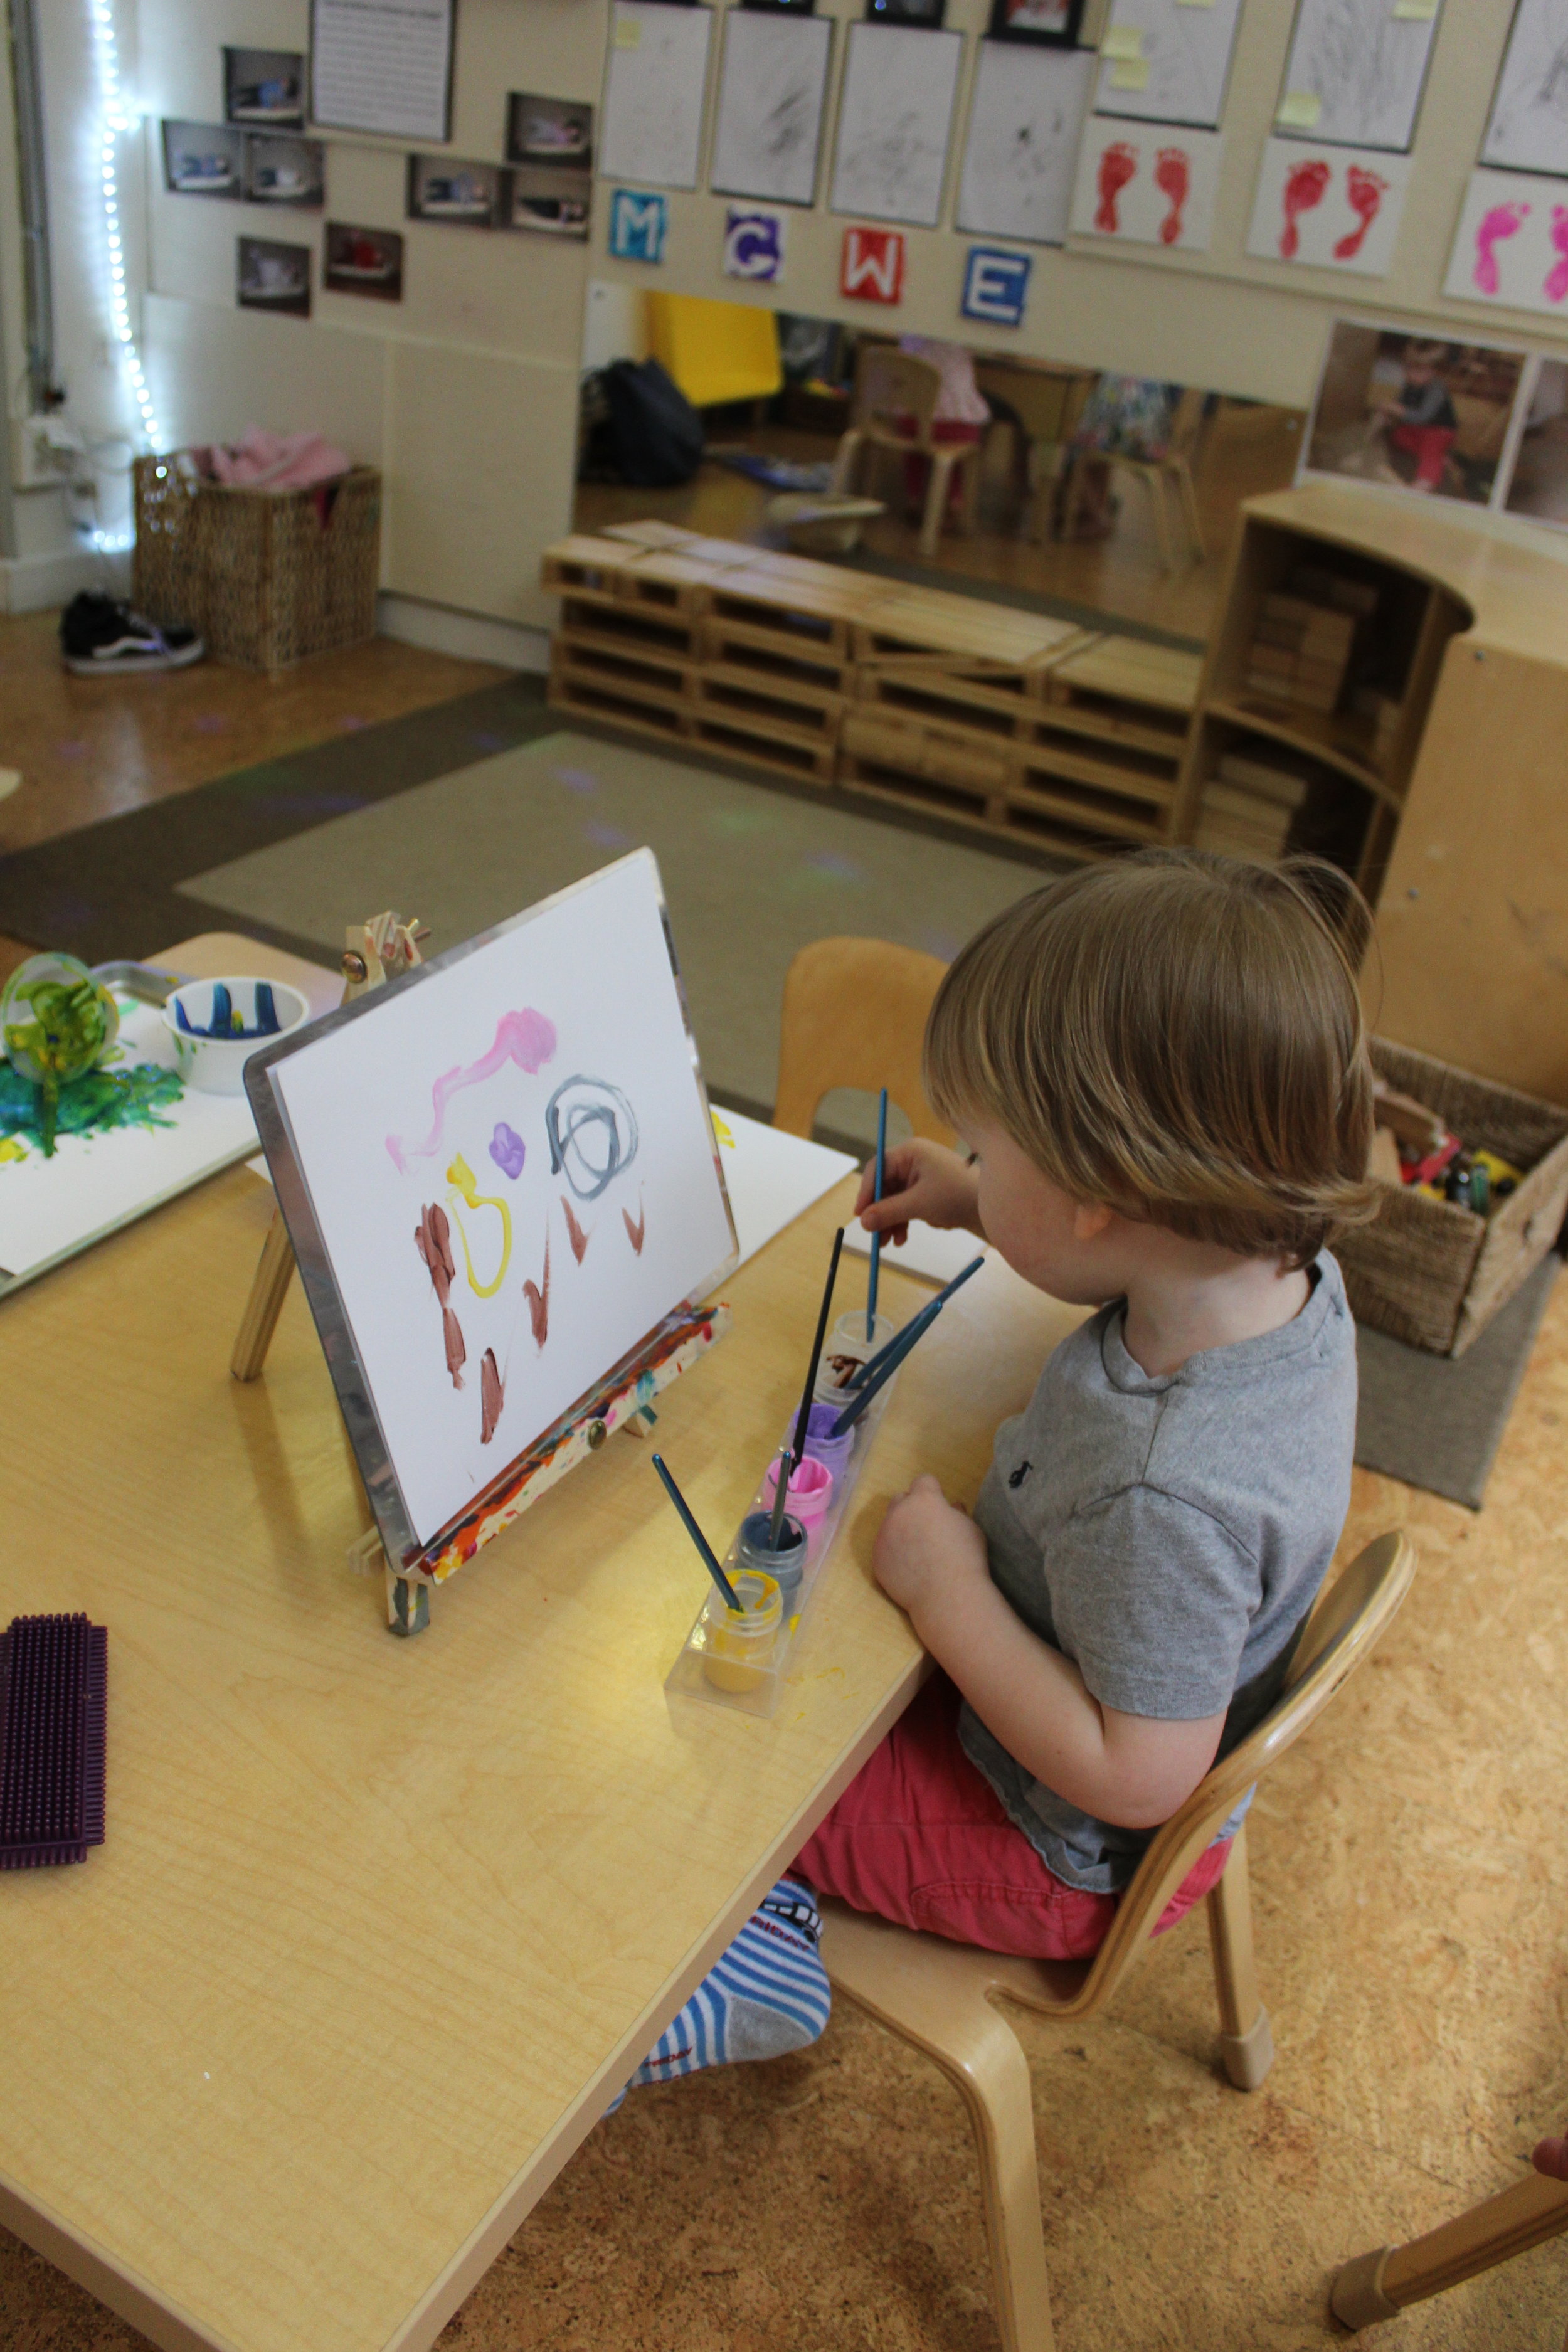  Painting at the small aisle&nbsp;has always been one of the children's favorite activities.&nbsp; It seems that it gives them a different perspective on painting.&nbsp; As they use a thin brush and a variety of colors, they appear to relax&nbsp;as t